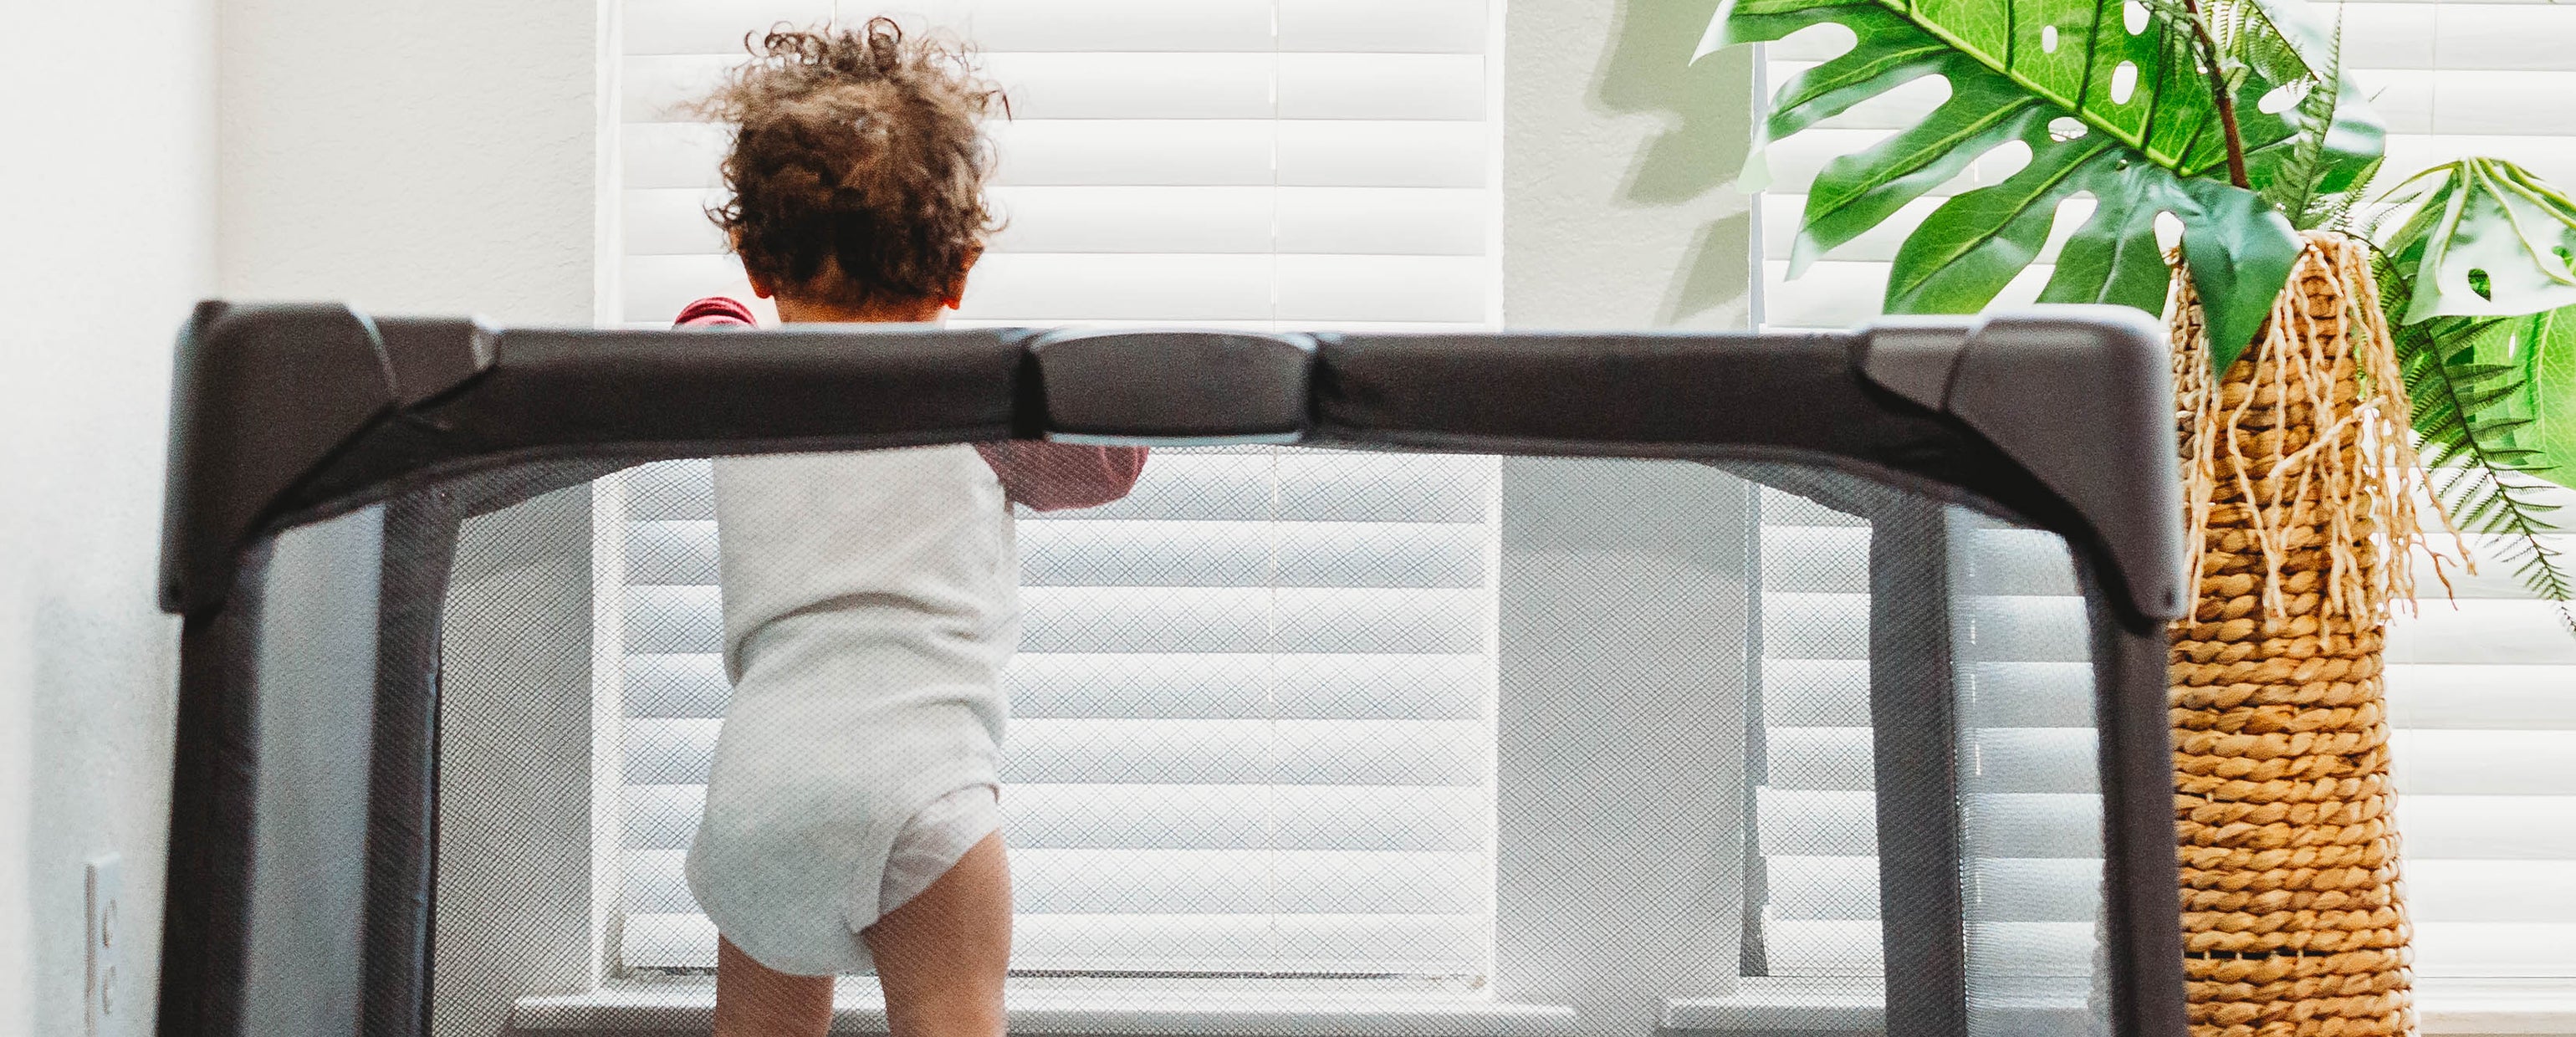 Babyproofing Your House: A Checklist for Every Room